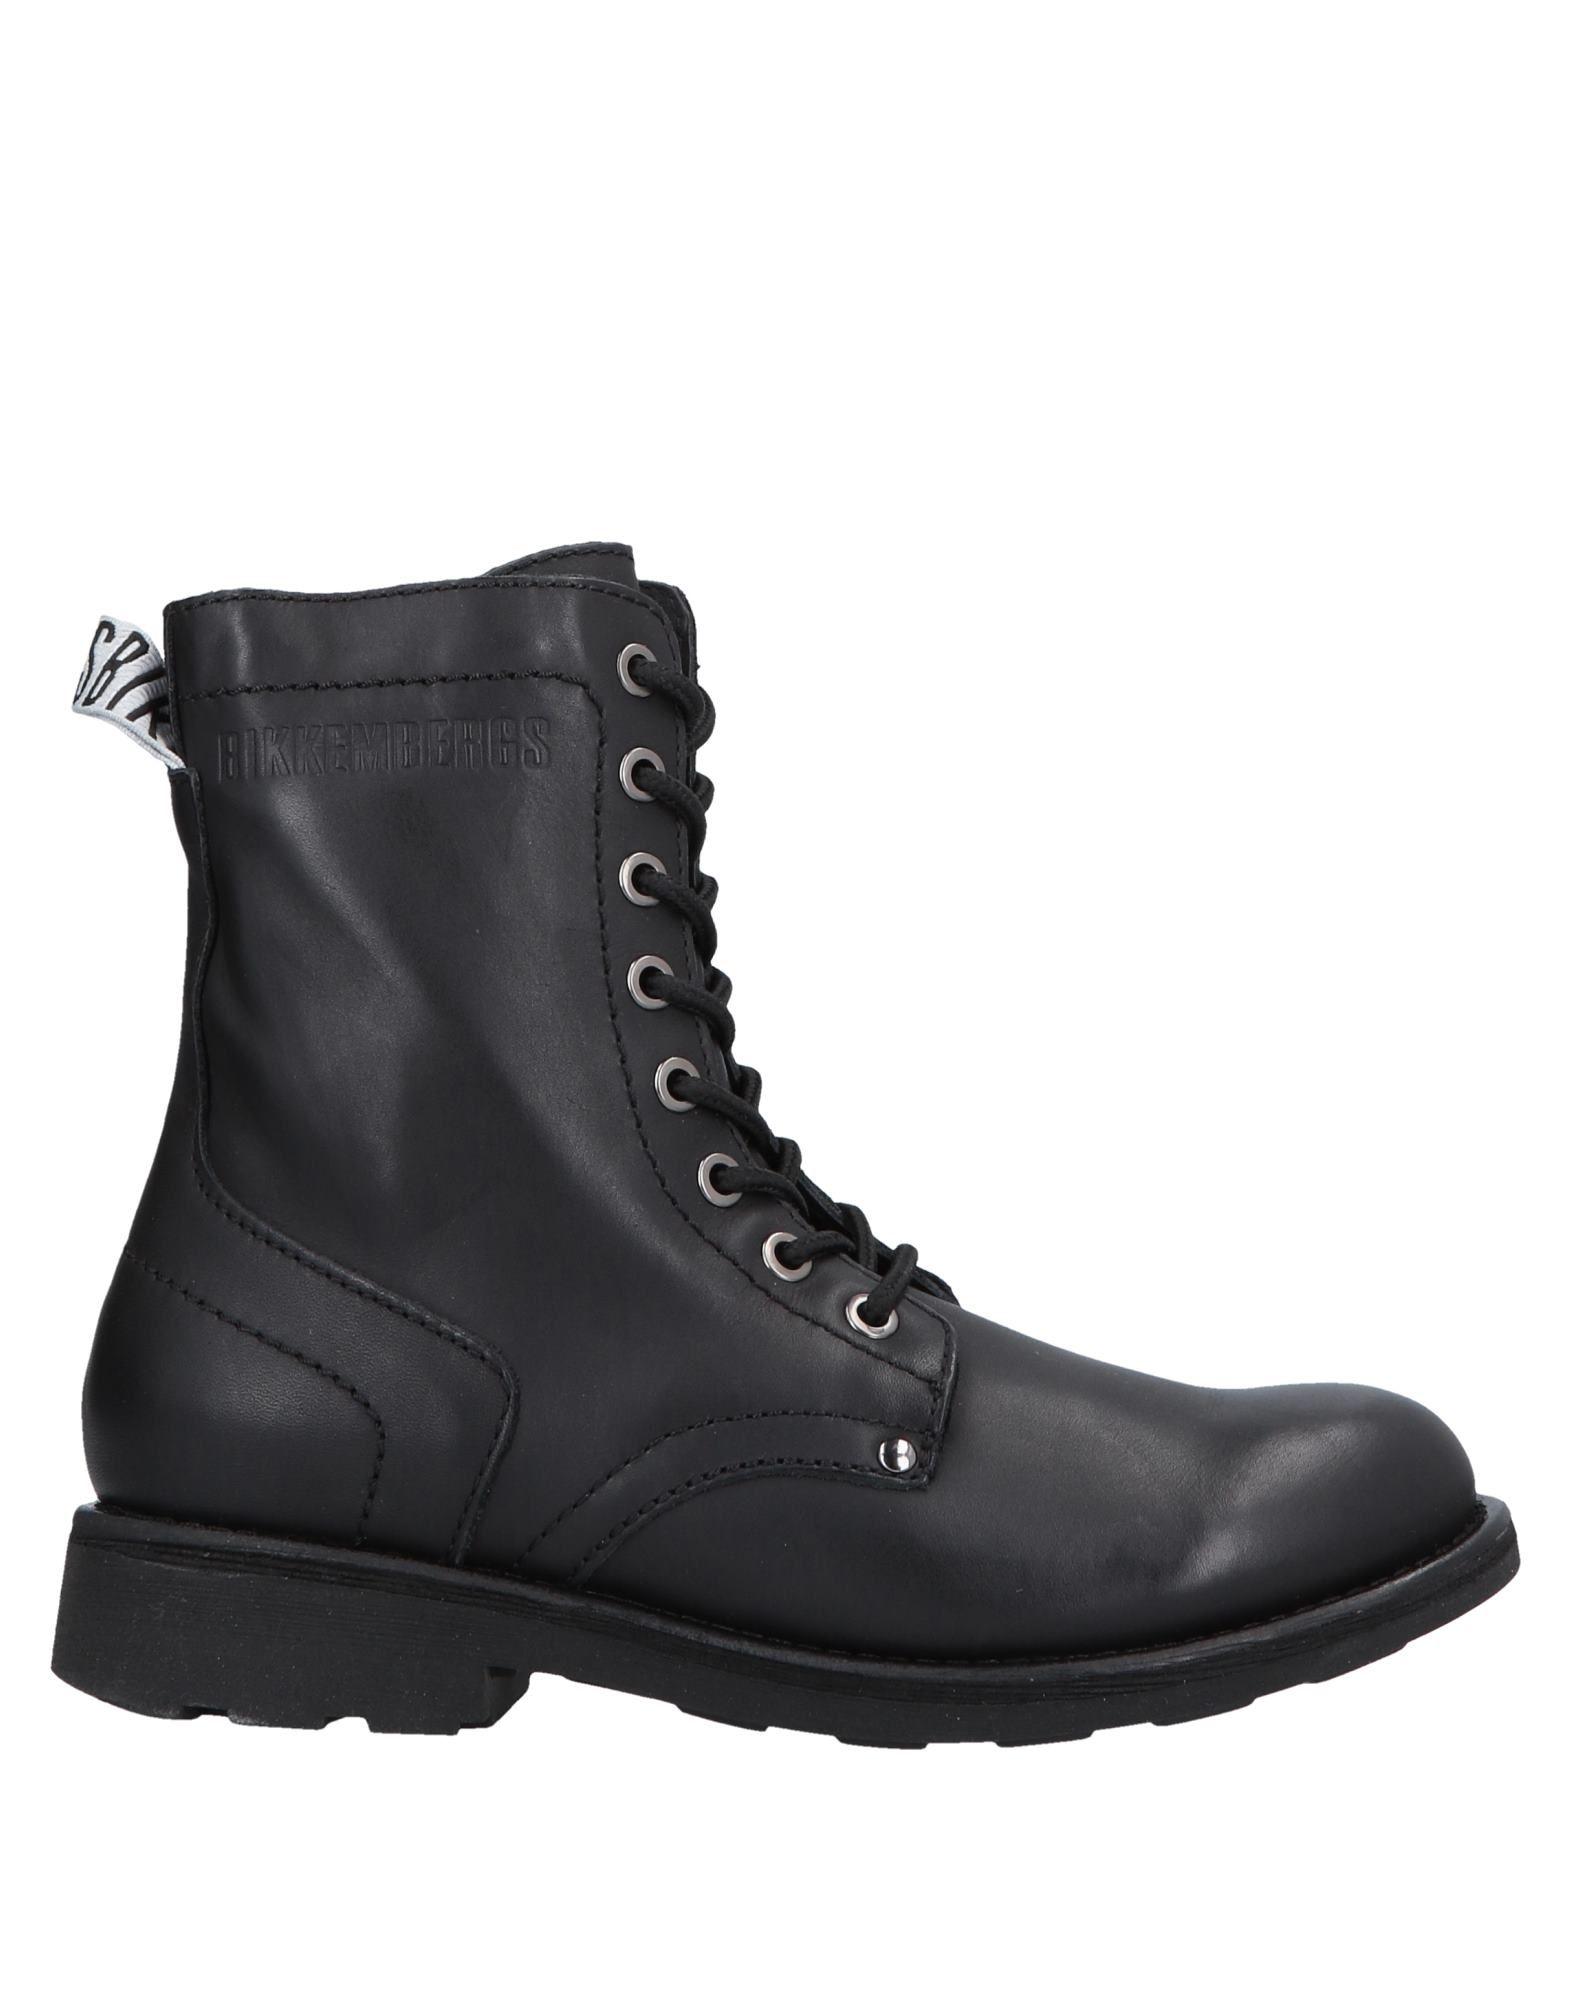 Bikkembergs Leather Ankle Boots in Black - Lyst